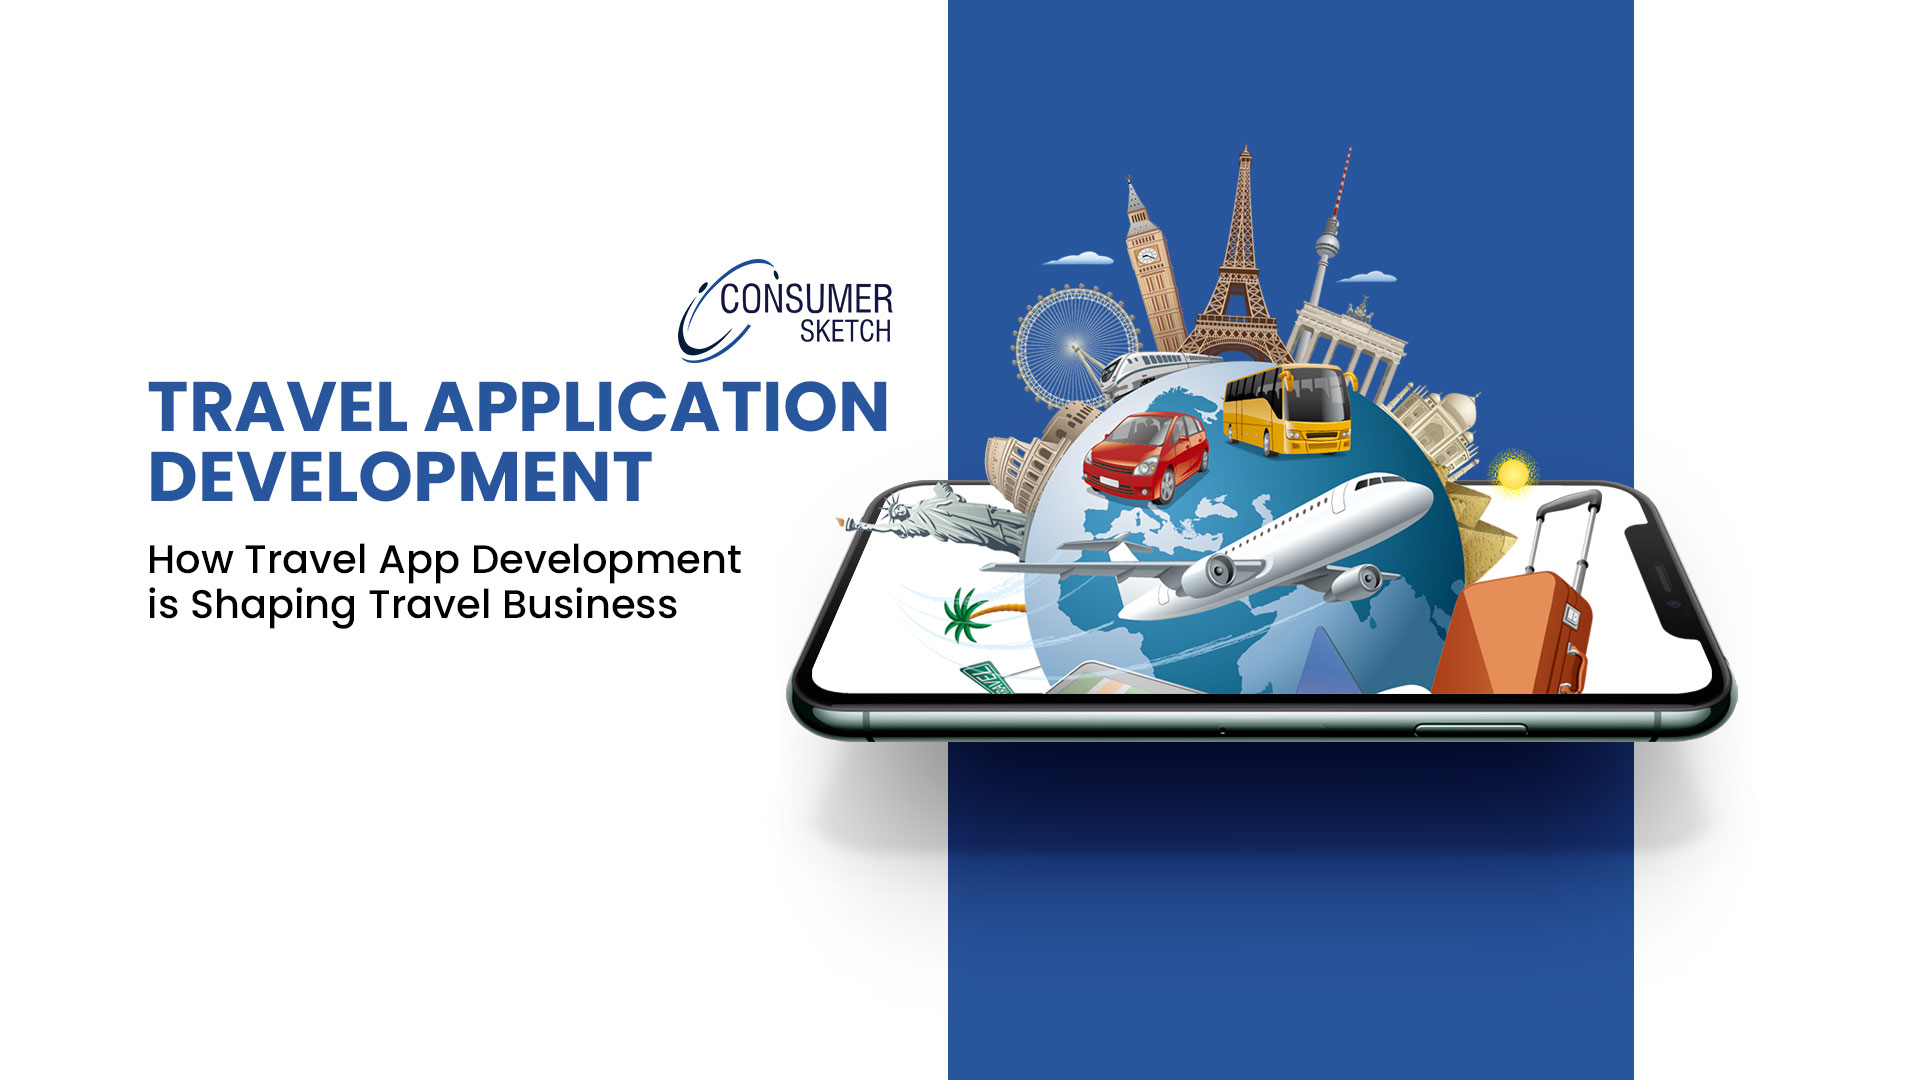 How Travel Application Development is Shaping Travel Business